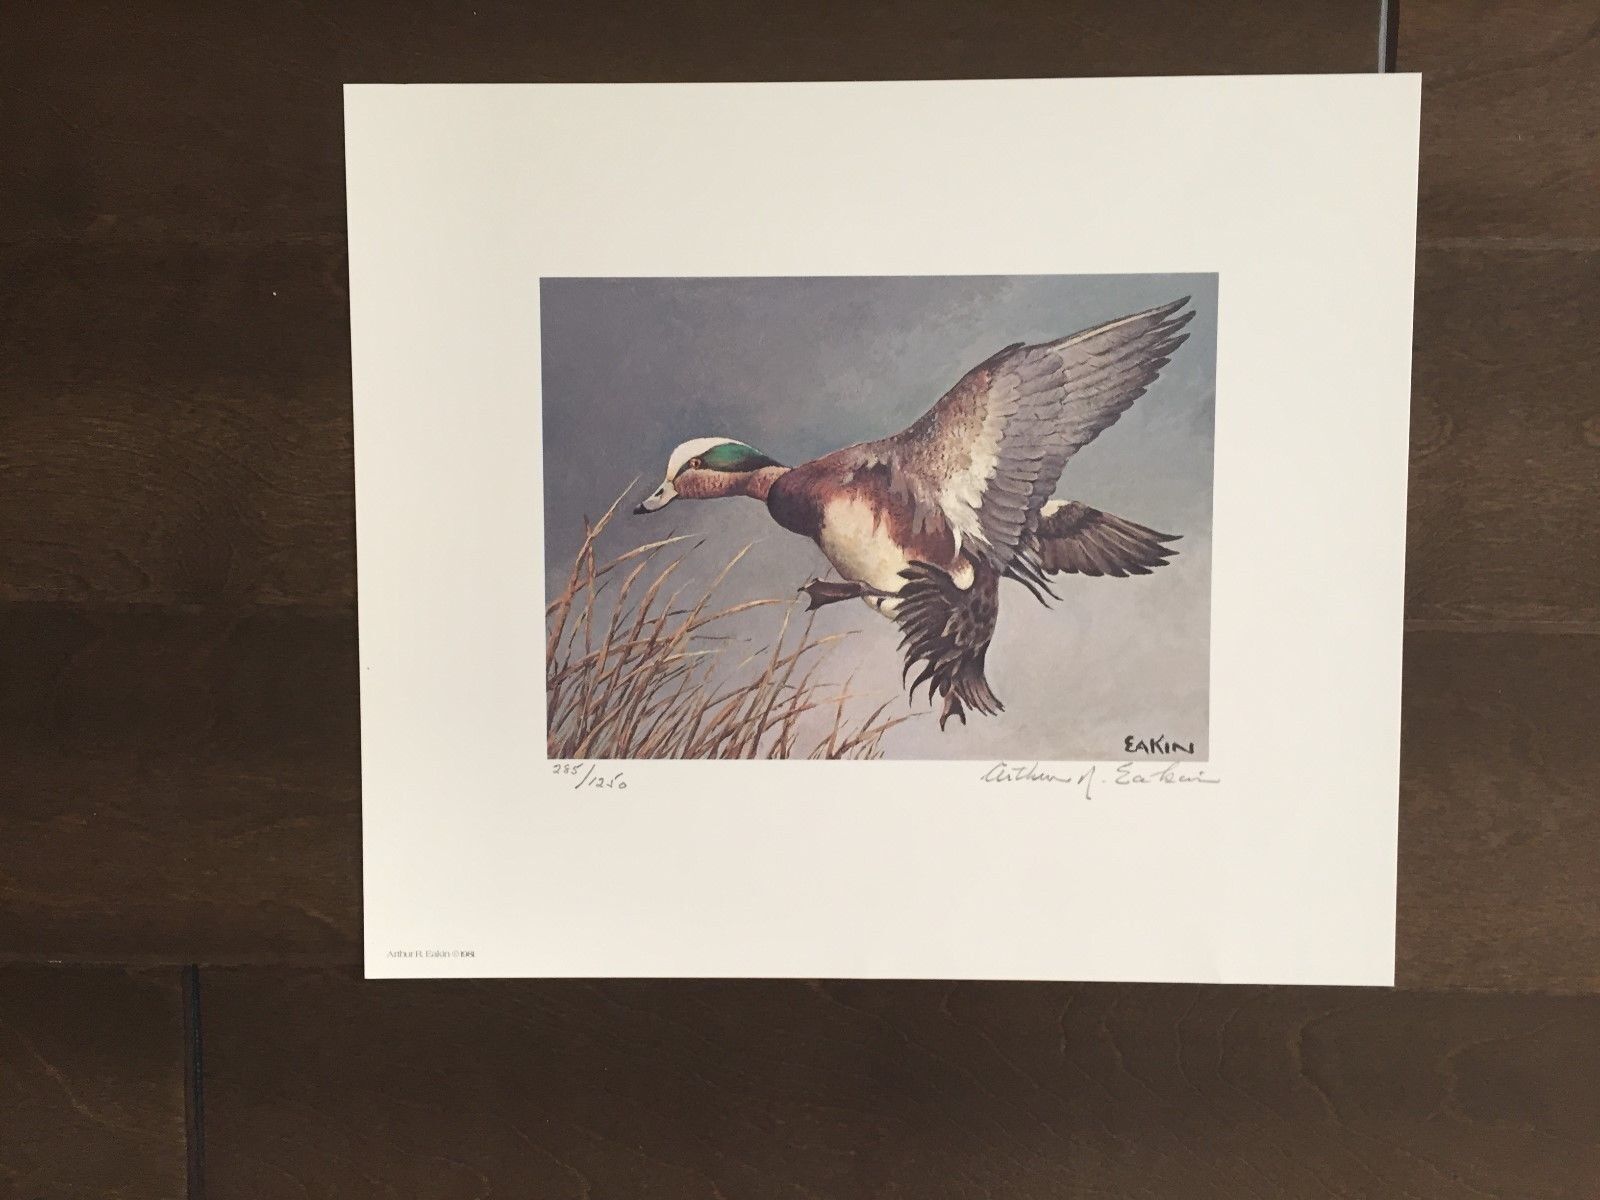 Maryland Migratory Duck Color Print -Signed by Arthur R. Eakin-1981